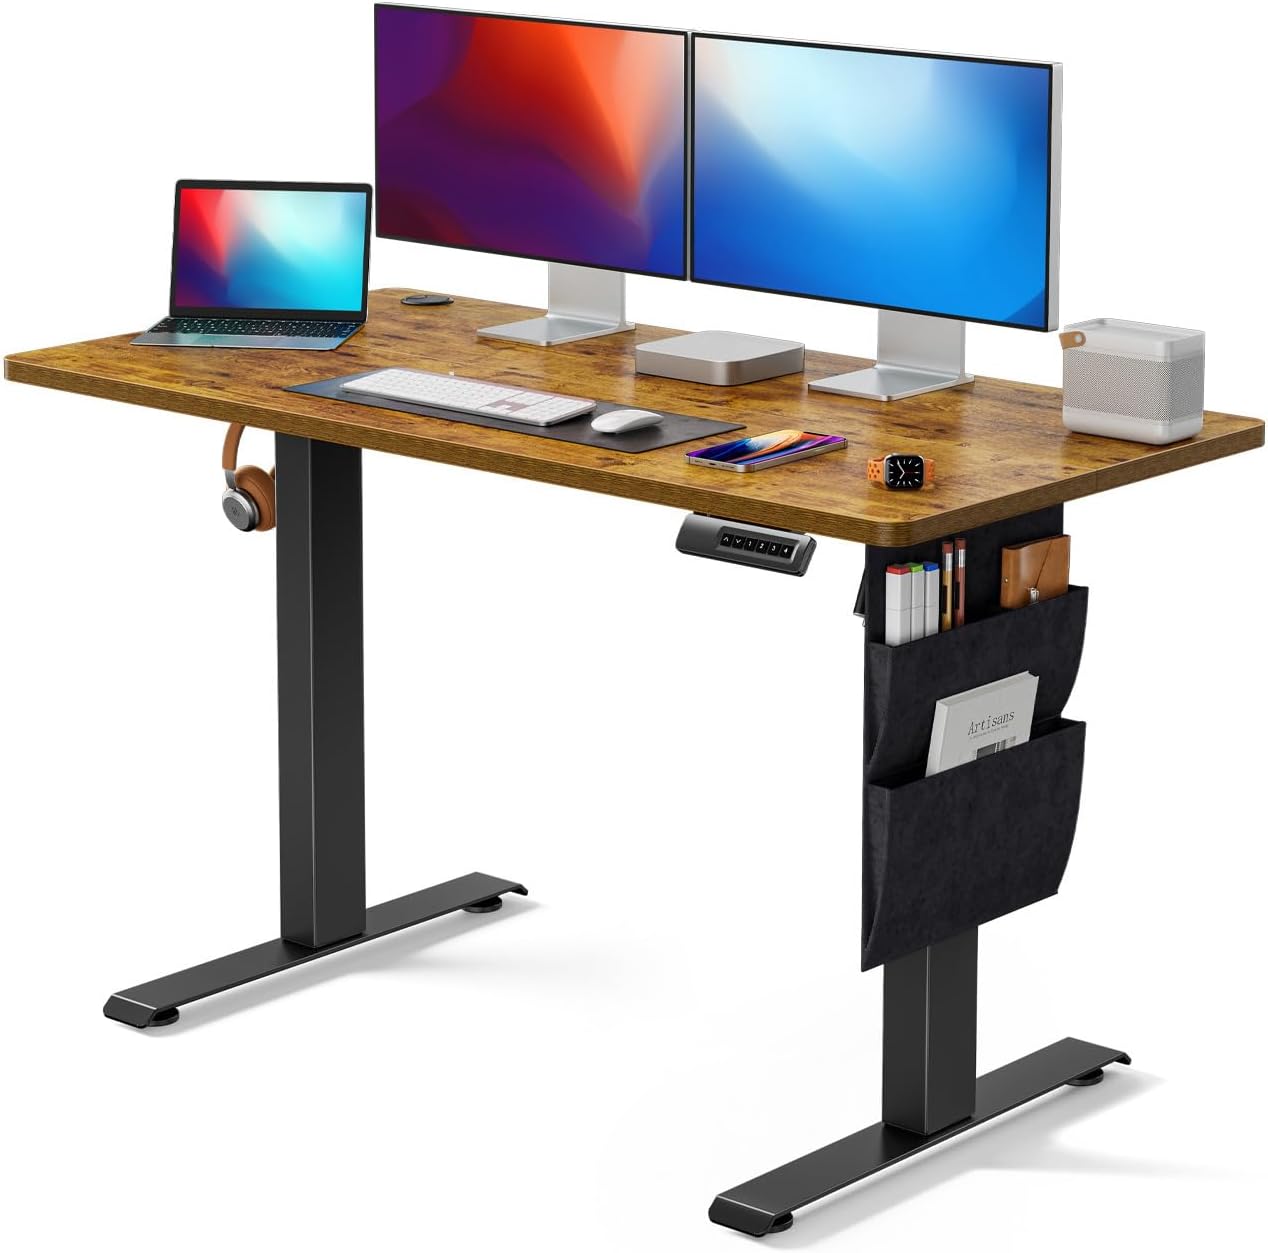 48" Marsail Adjustable Electric Standing Desk w/ Storage Bag (Rustic) $100.54 + Free Shipping